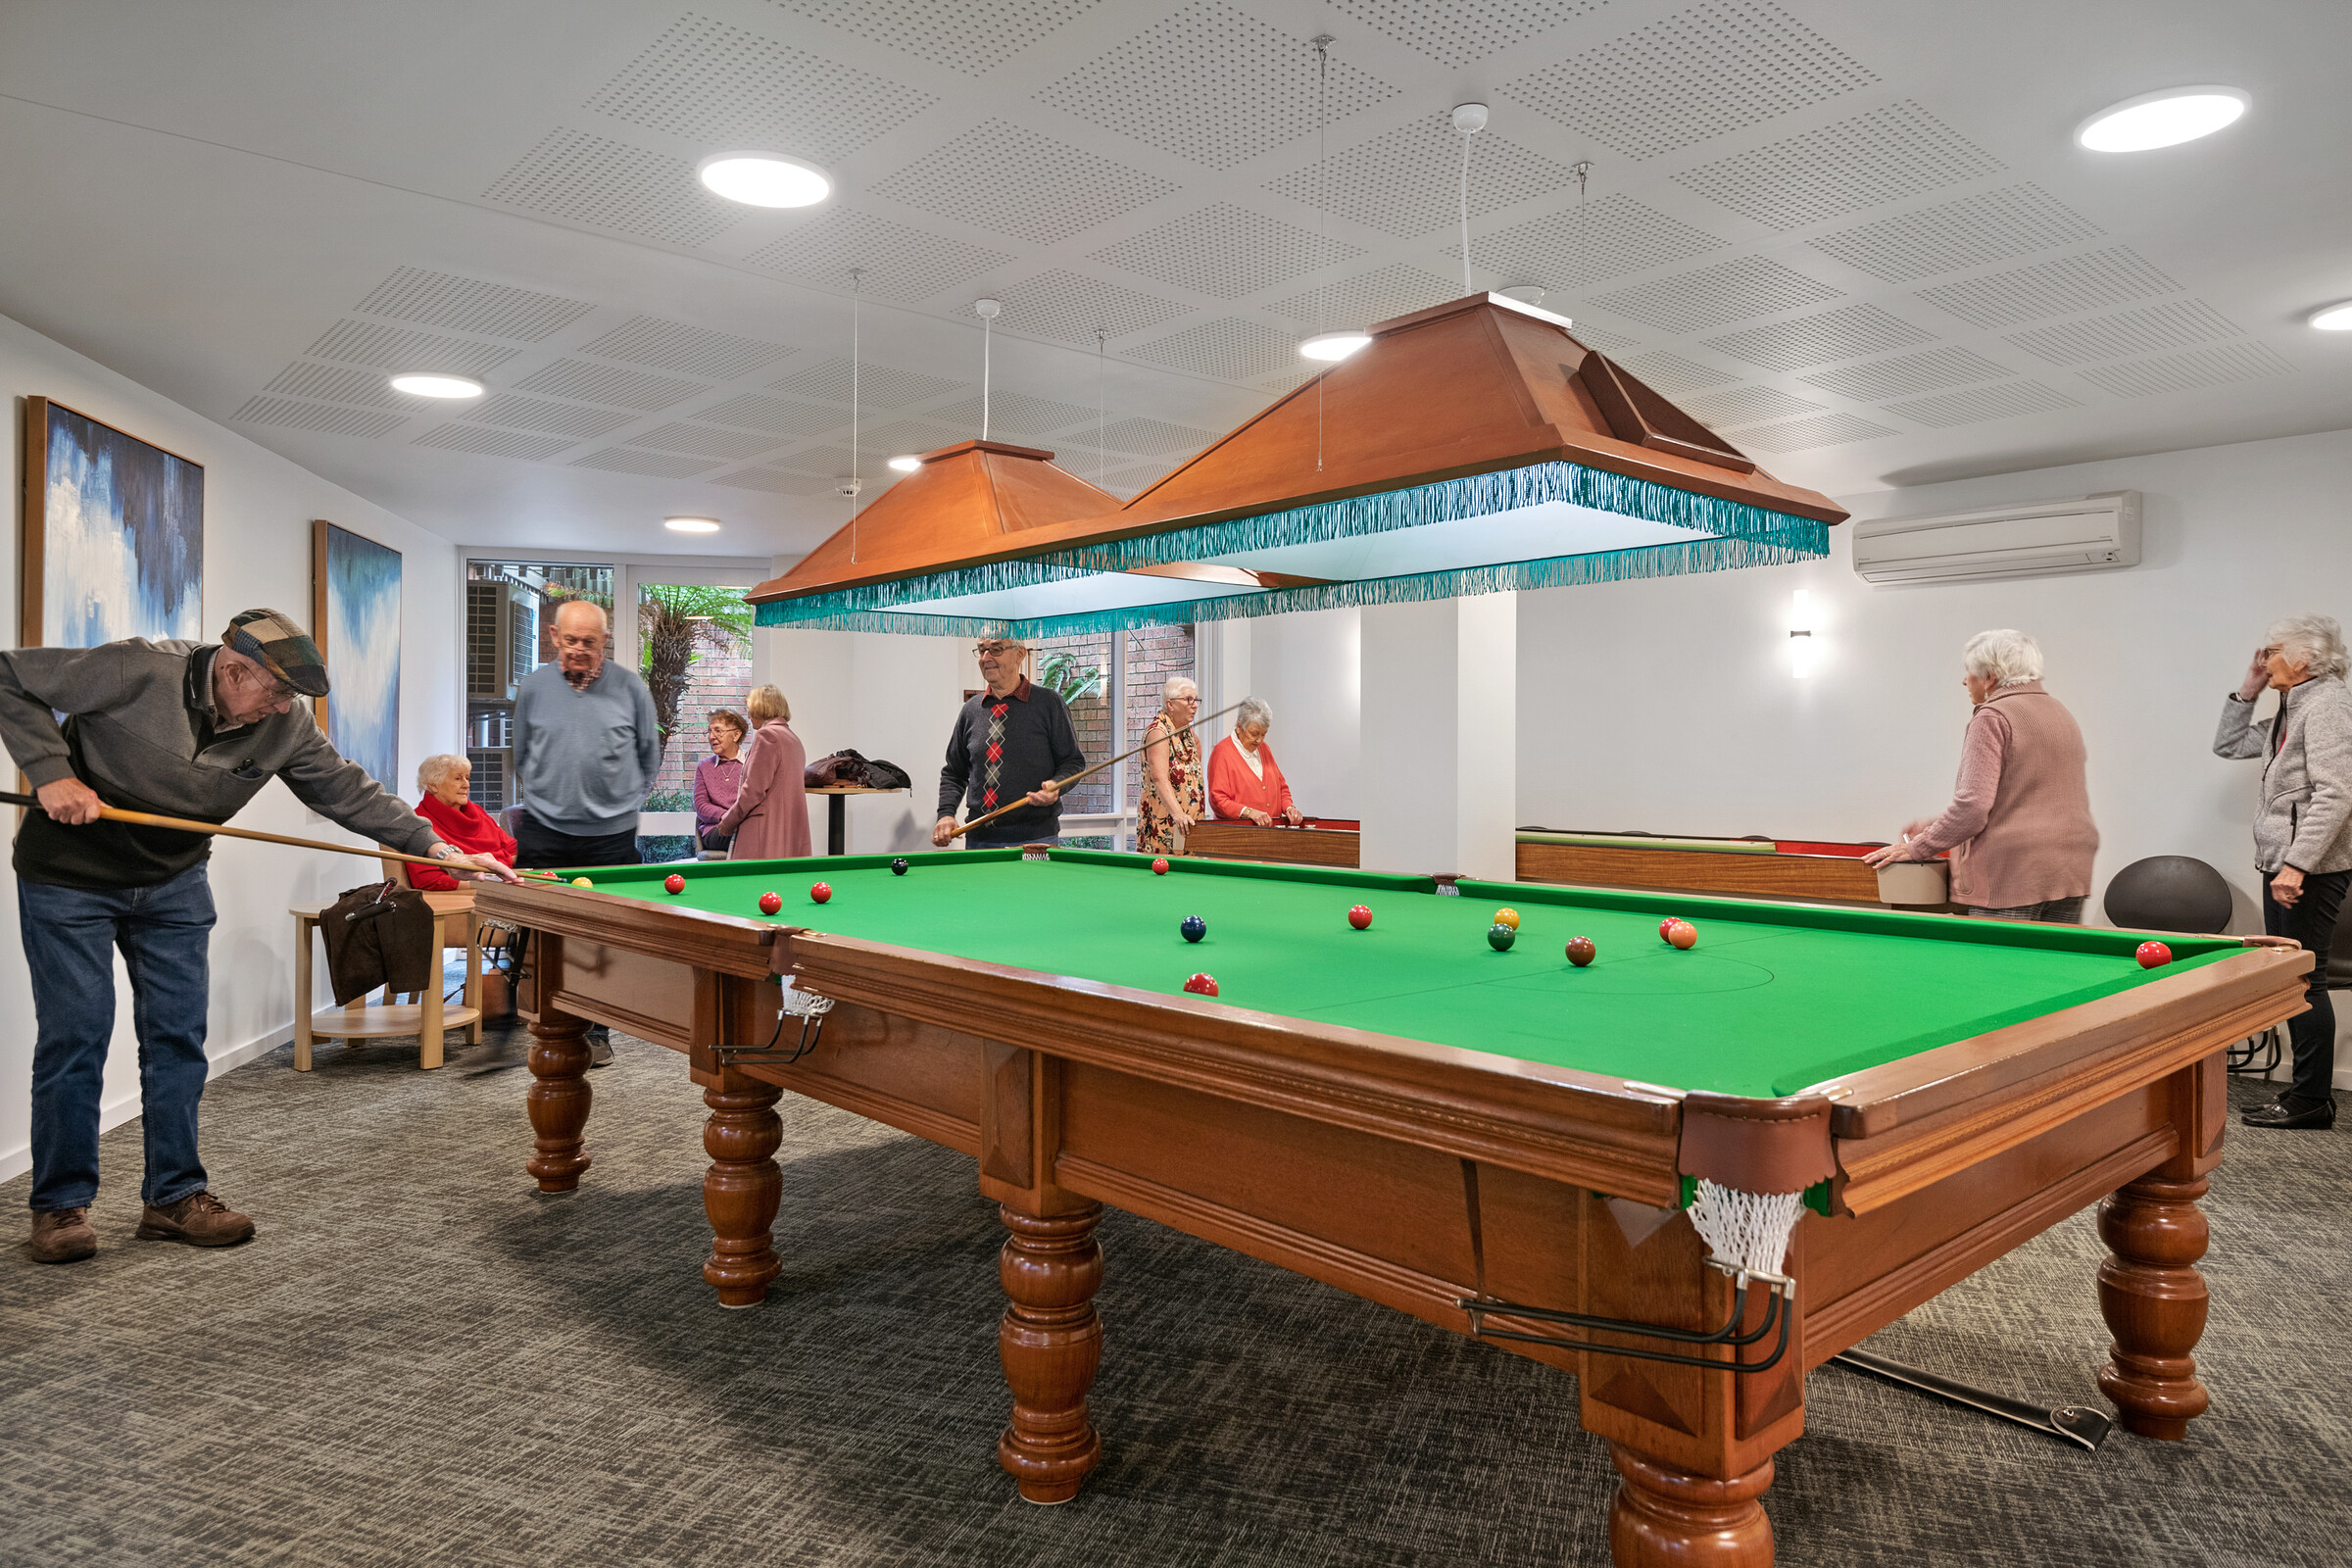 Pet friendly Two Dee Why Gardens Pool or Snooker tables with residents playing